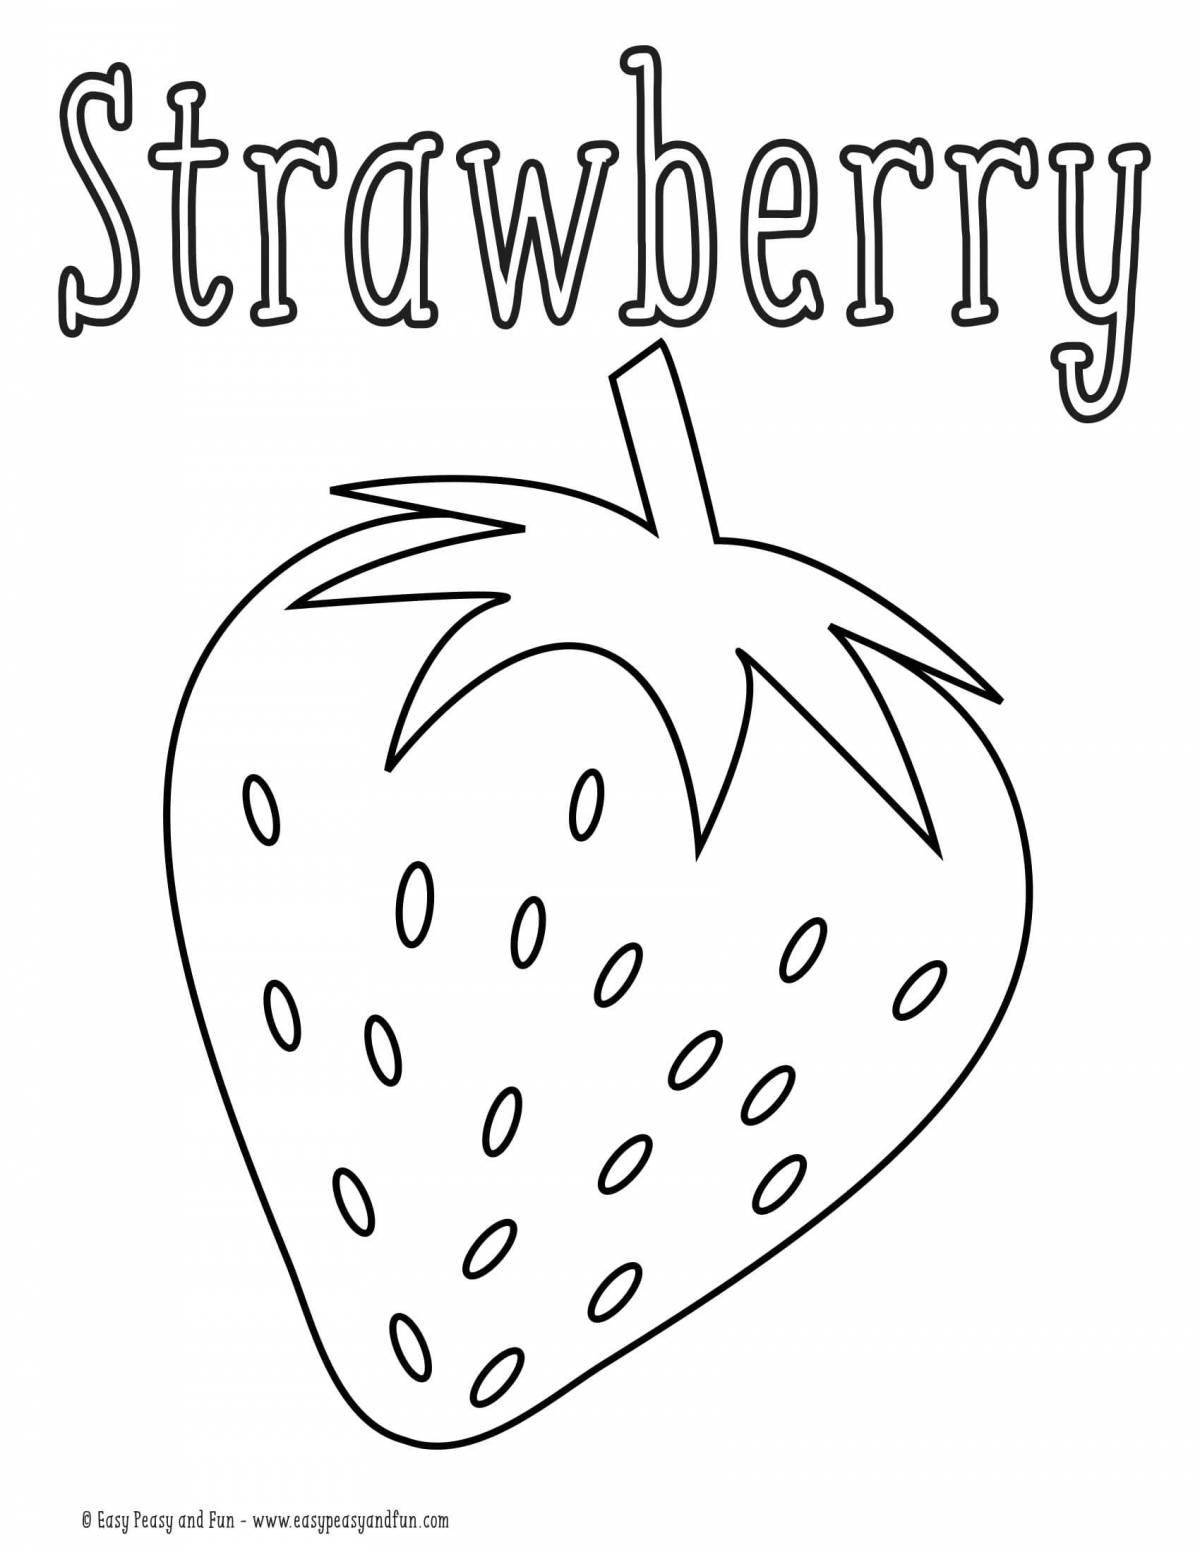 Fabulous strawberry coloring book for 3-4 year olds